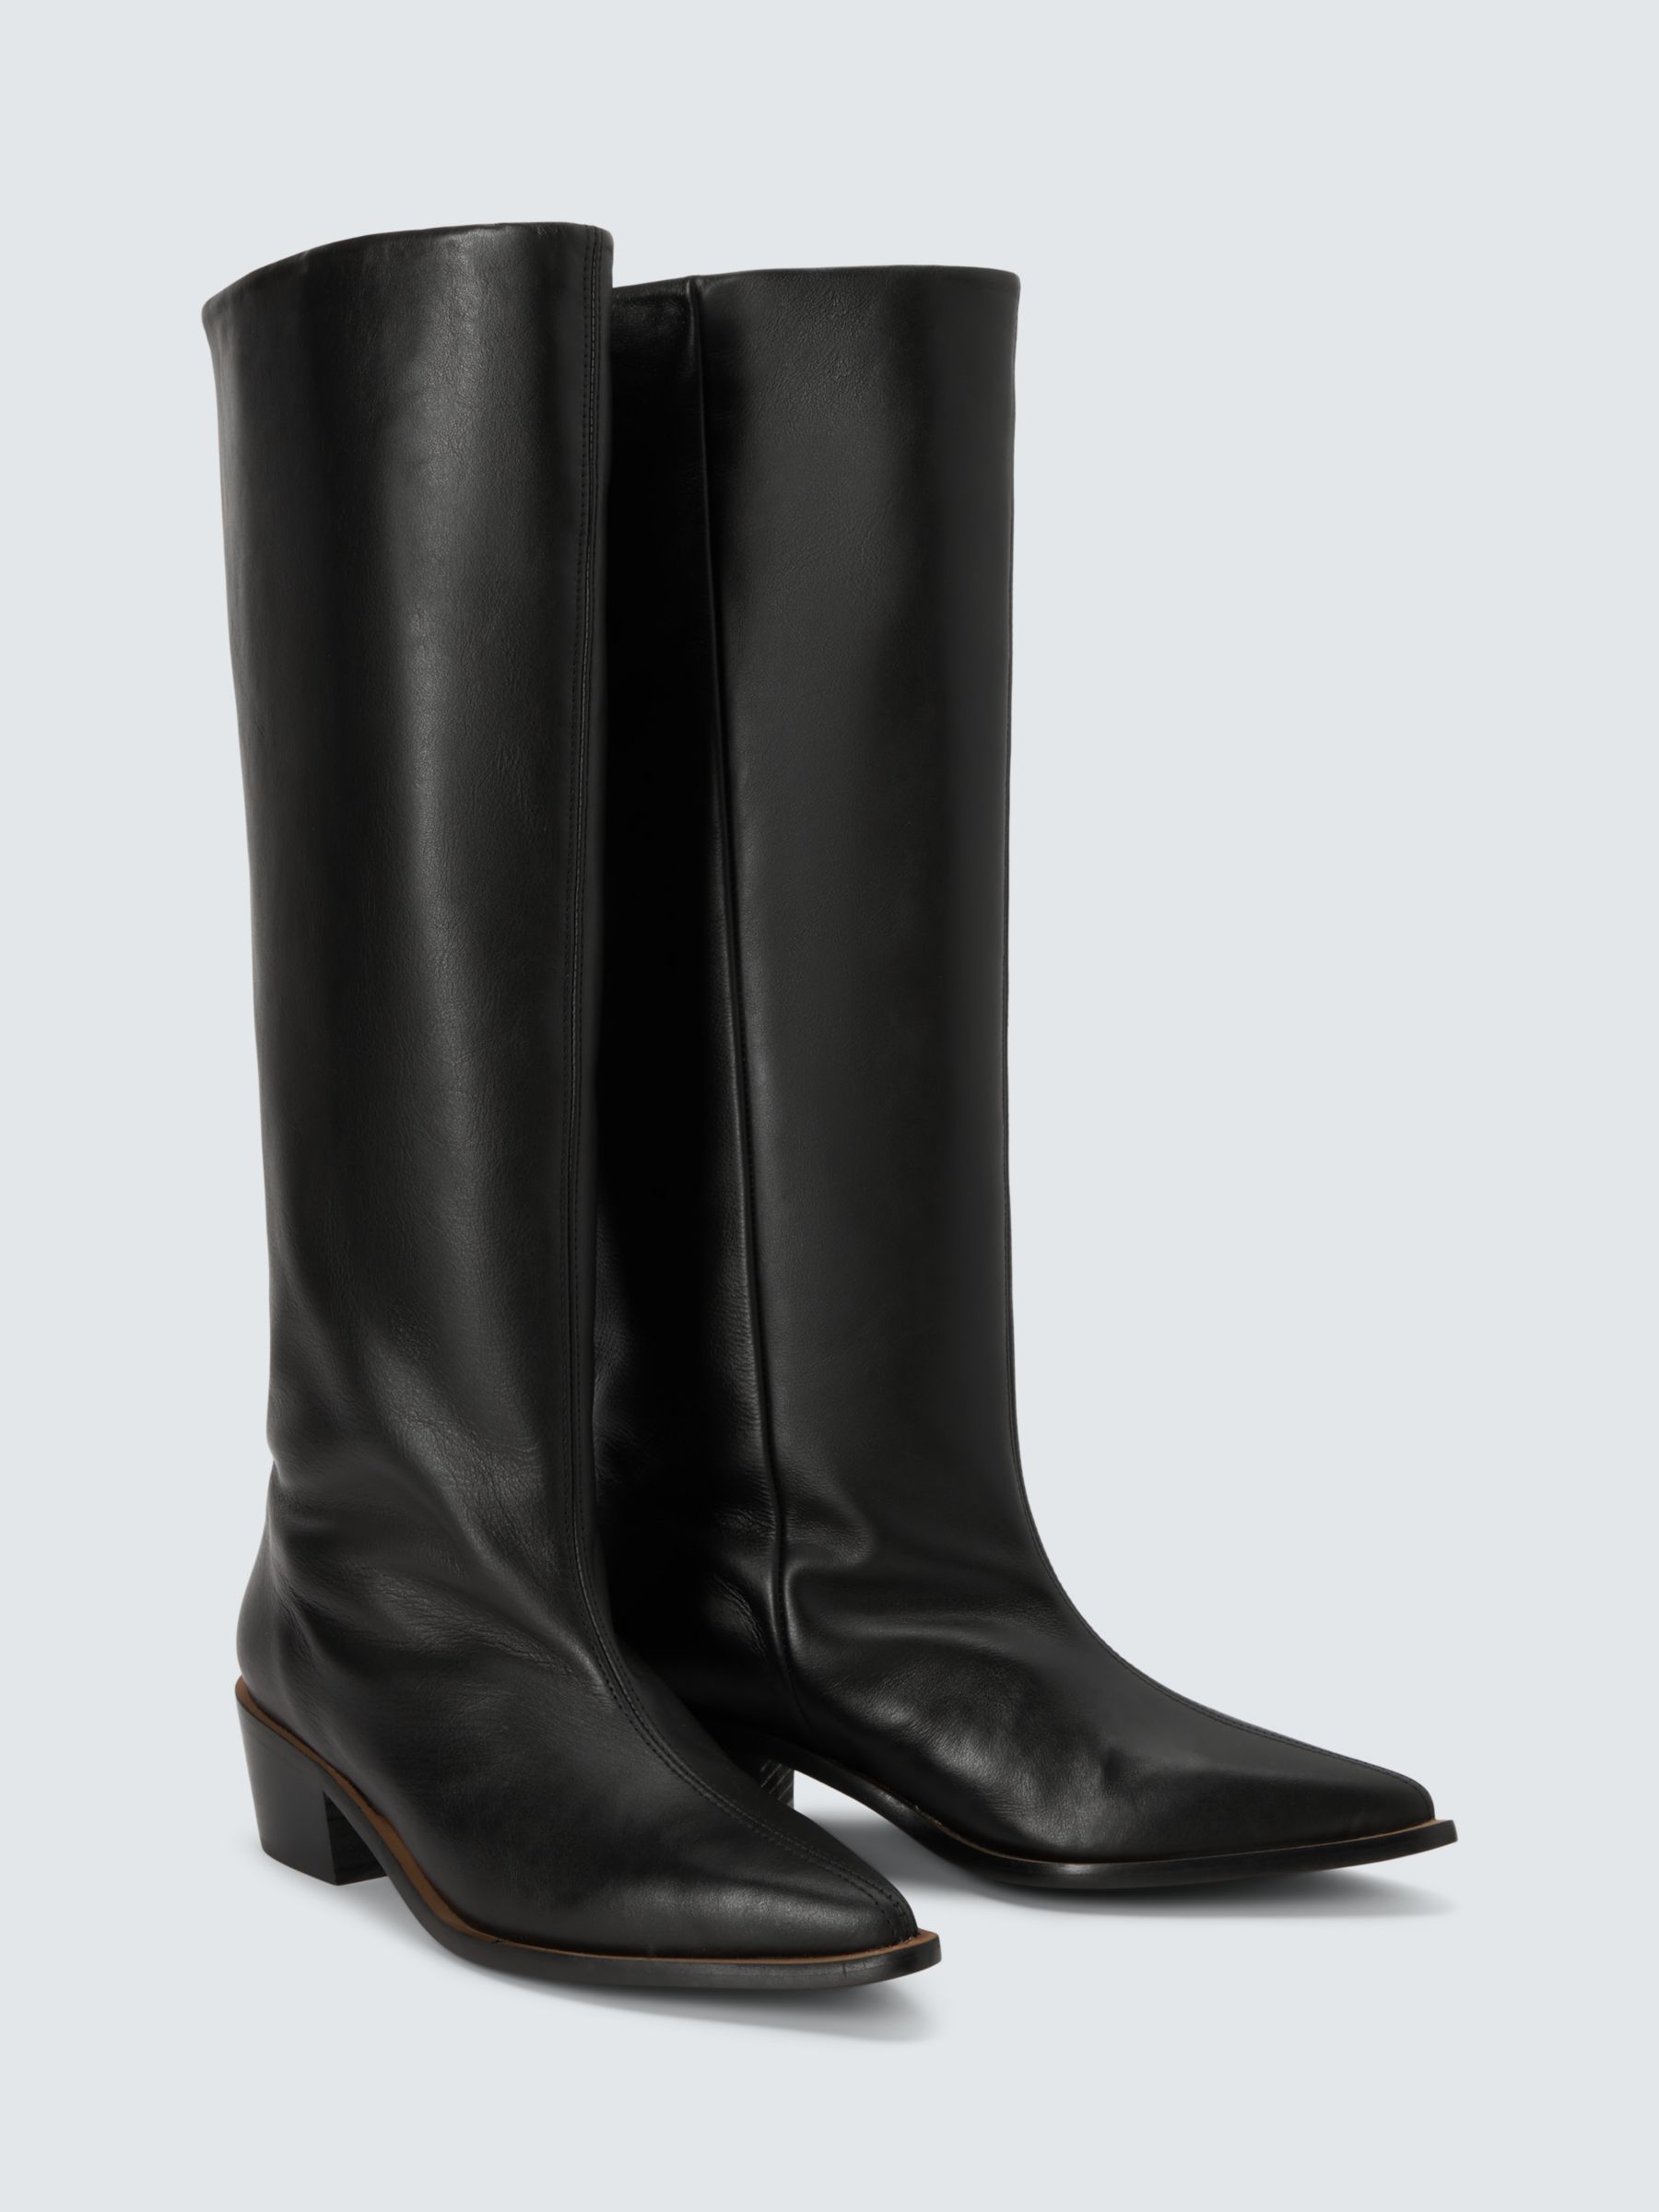 AND/OR Sainte Leather Low Heel Long Western Boots, Black